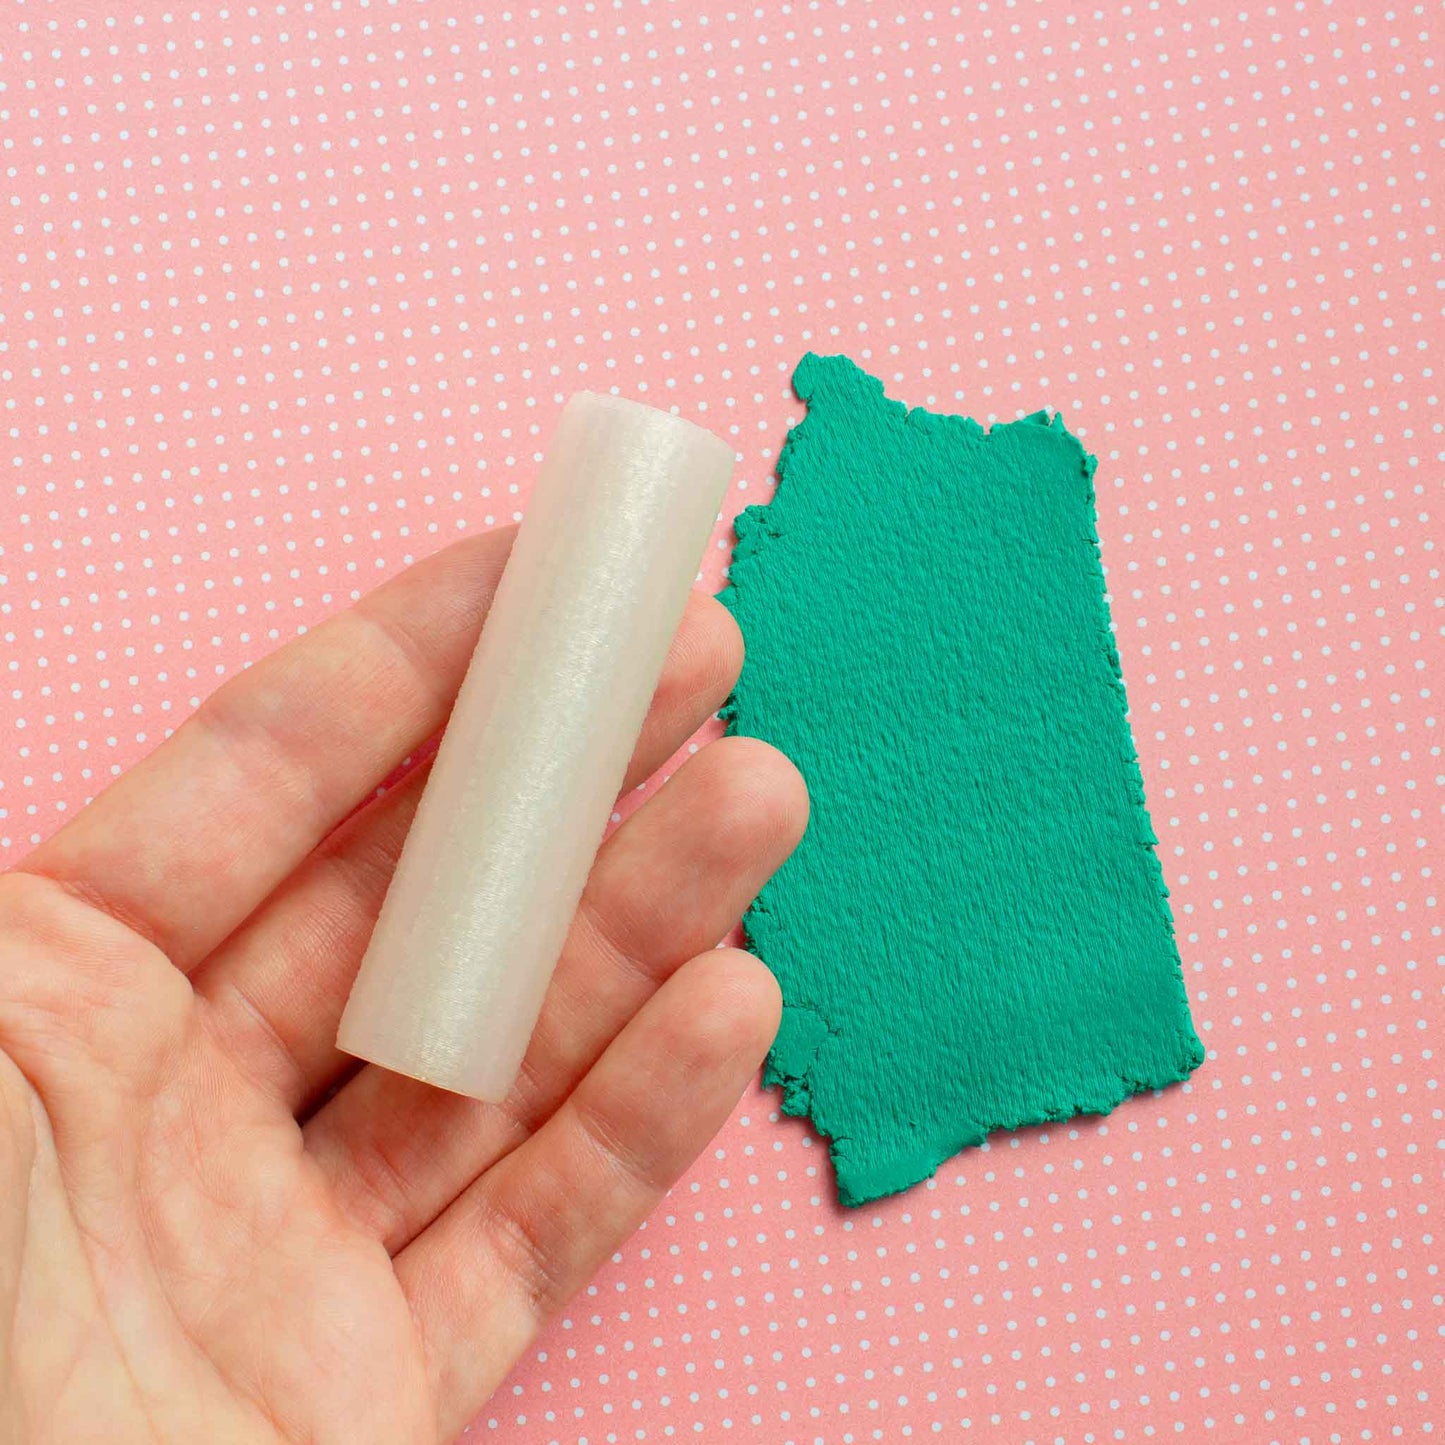 Sandpaper texture roller for polymer clay